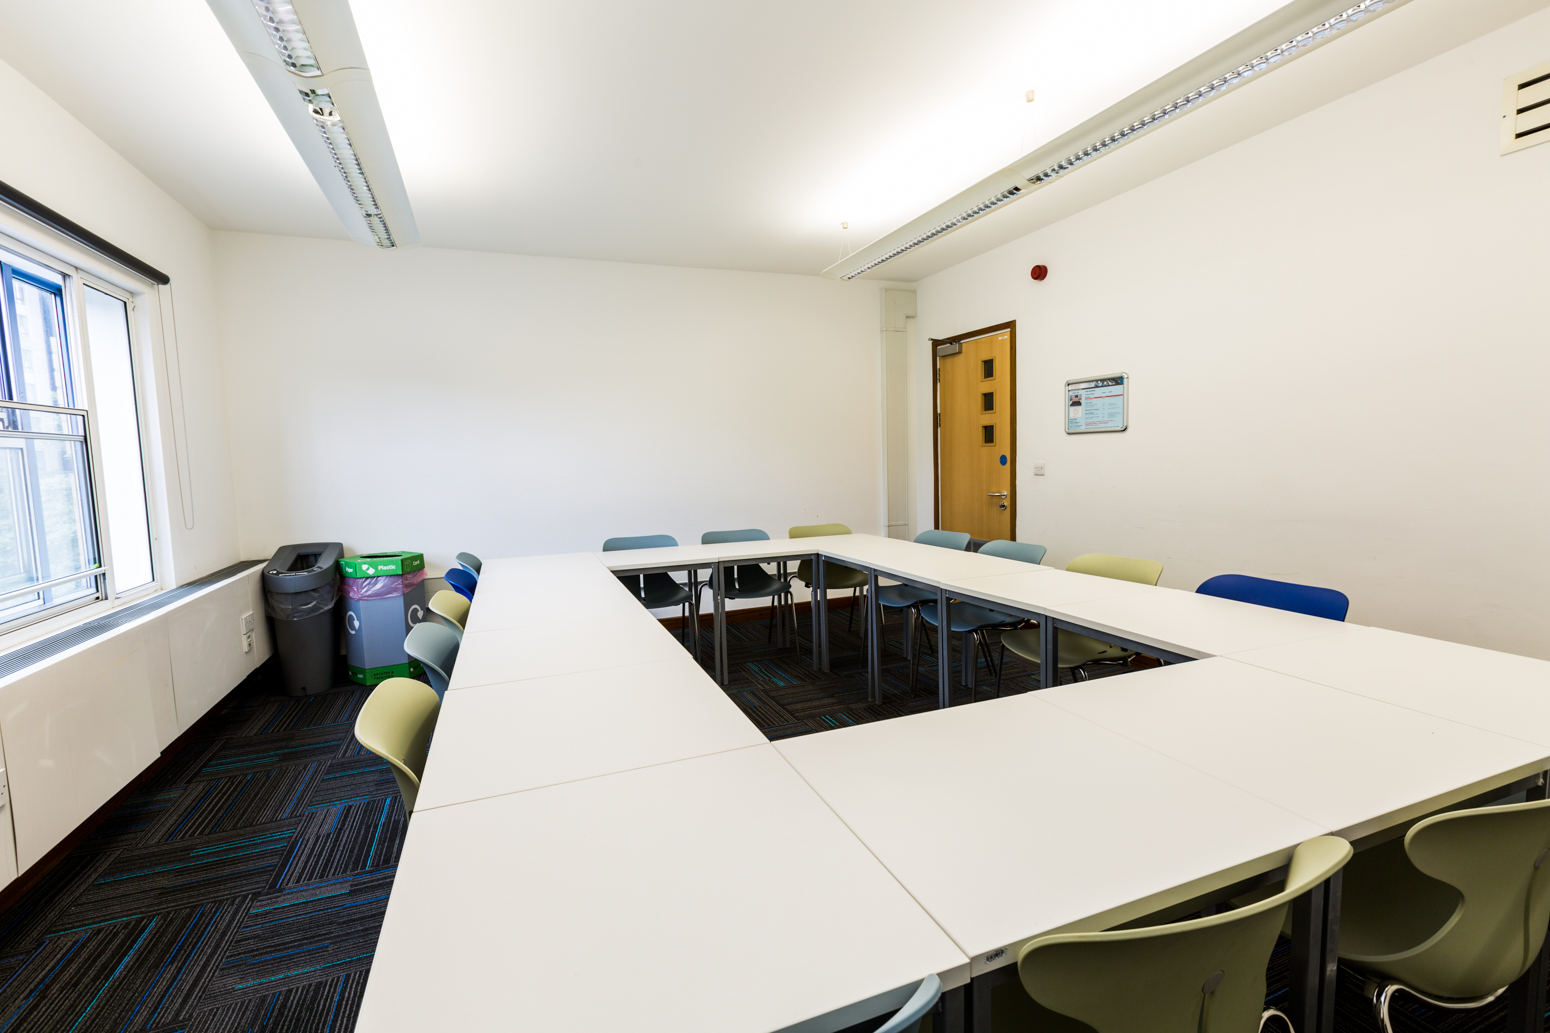 Queen Mary University of London - Classroom